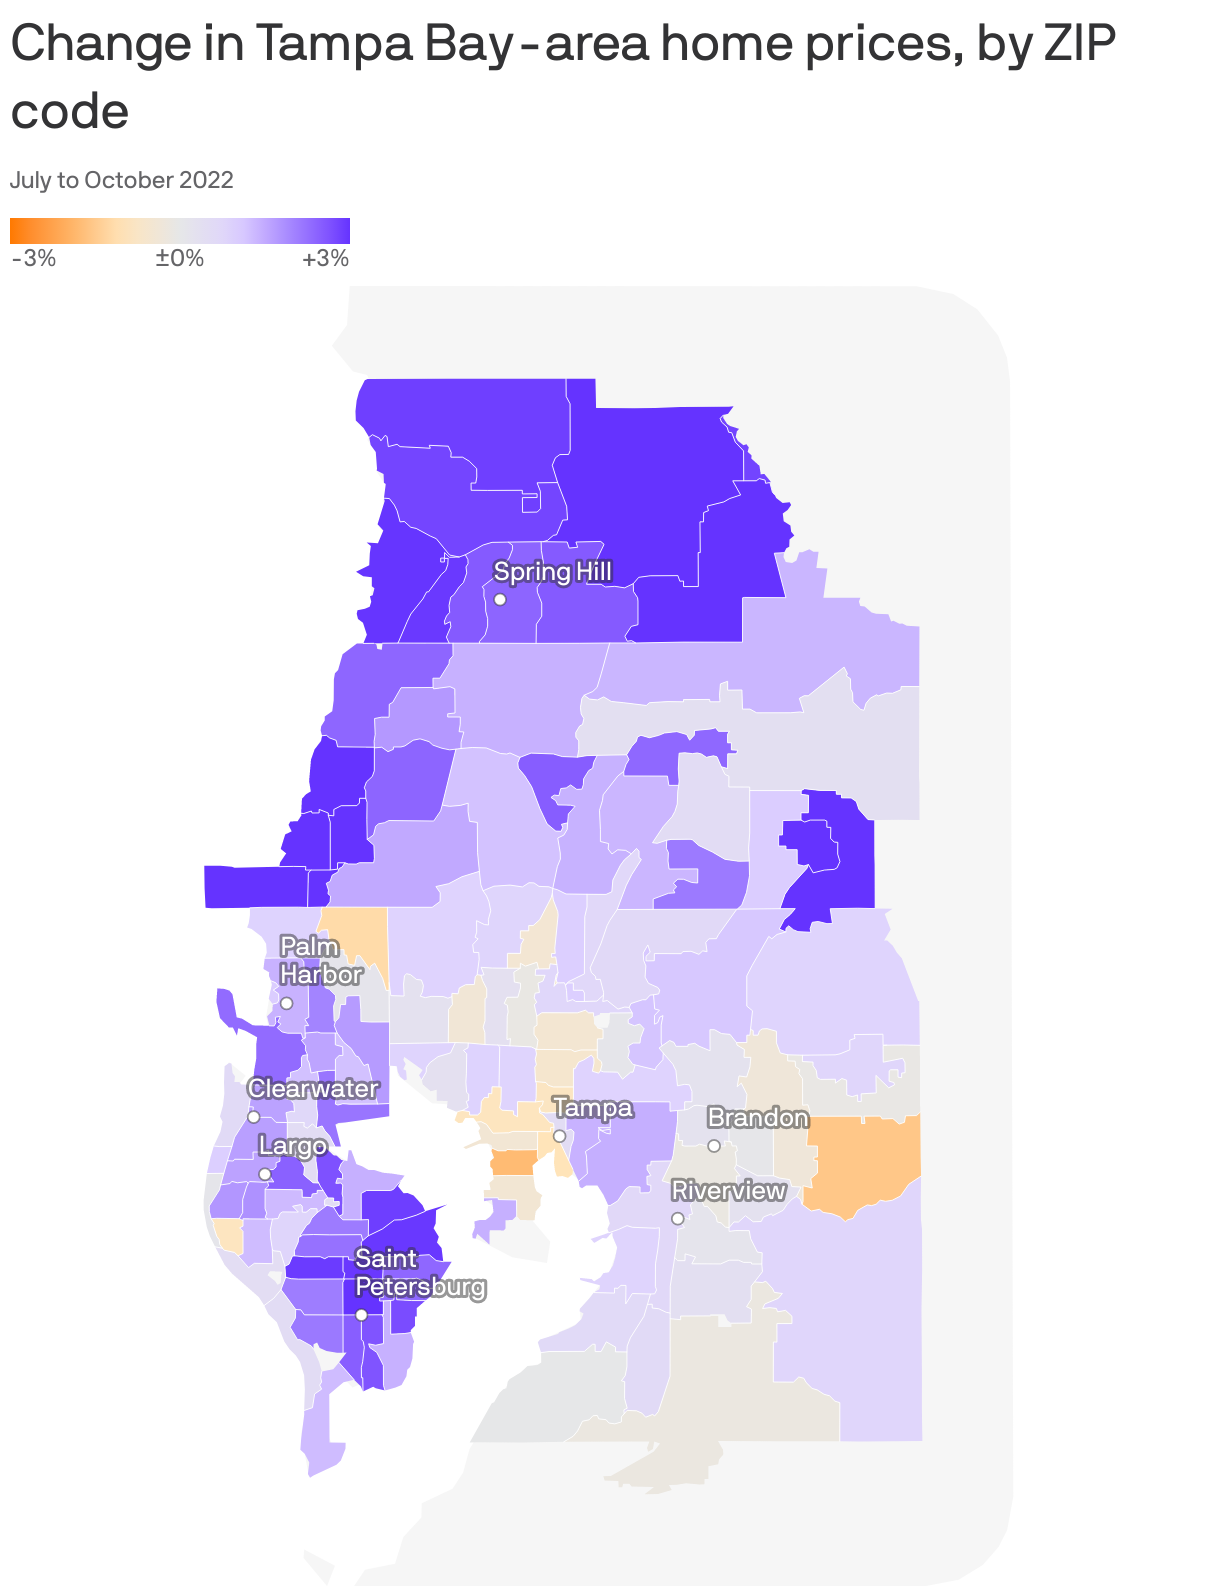 Change in Tampa Bay-area home prices, by ZIP code